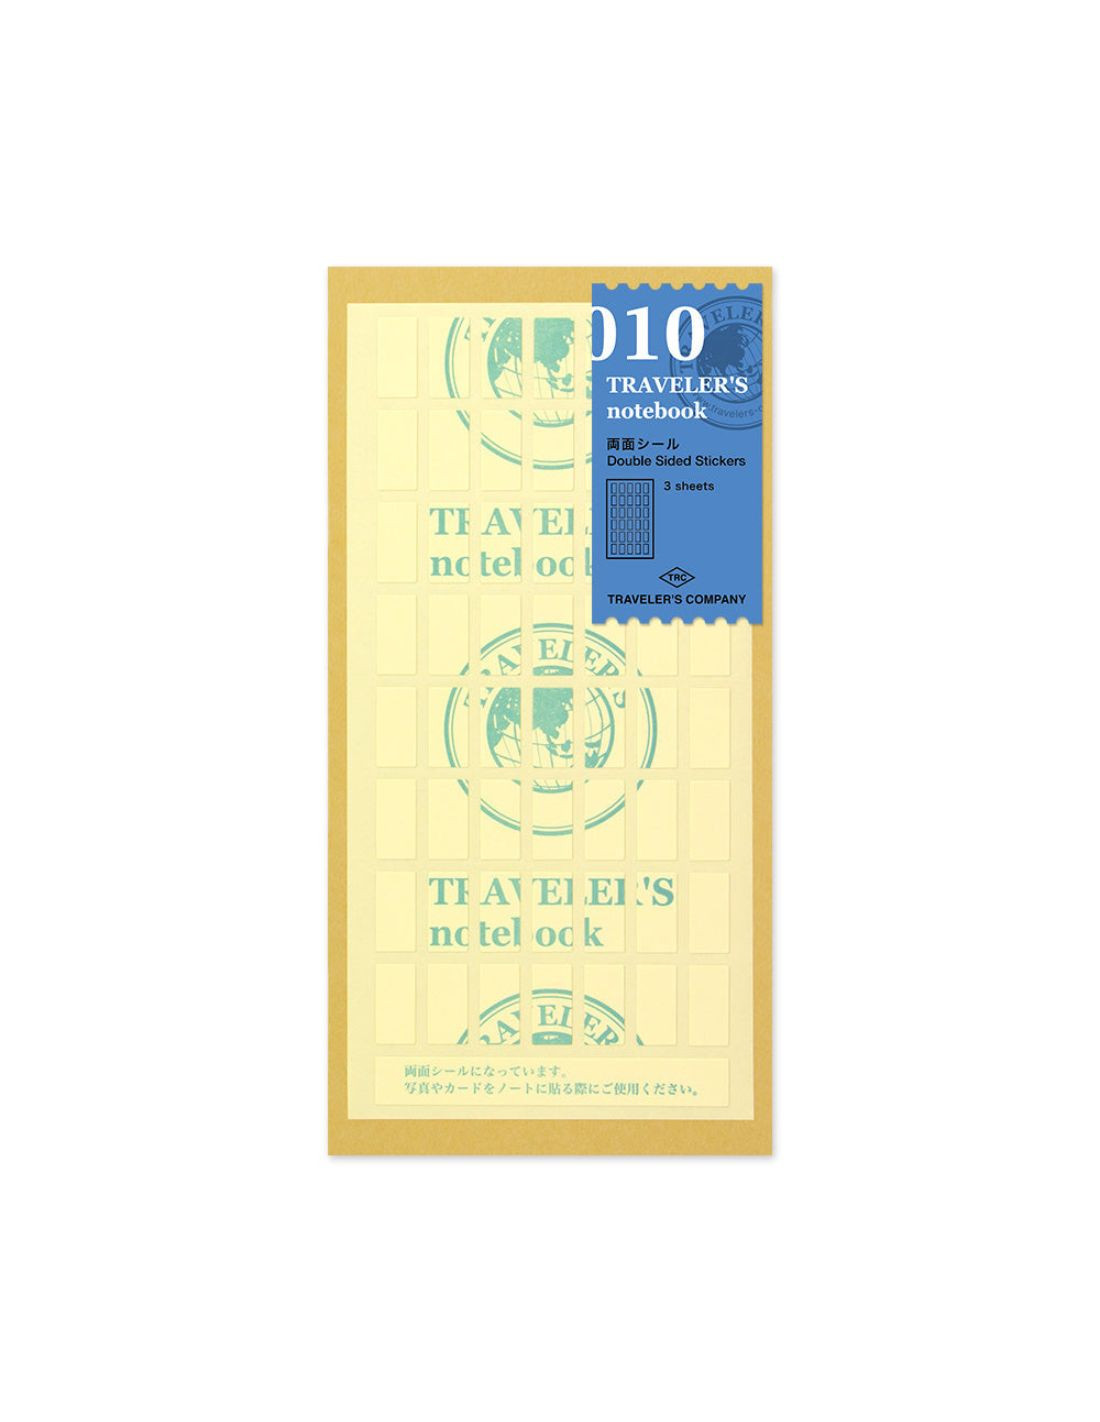 Refill 010 Double-sided stickers - TRAVELER'S notebook